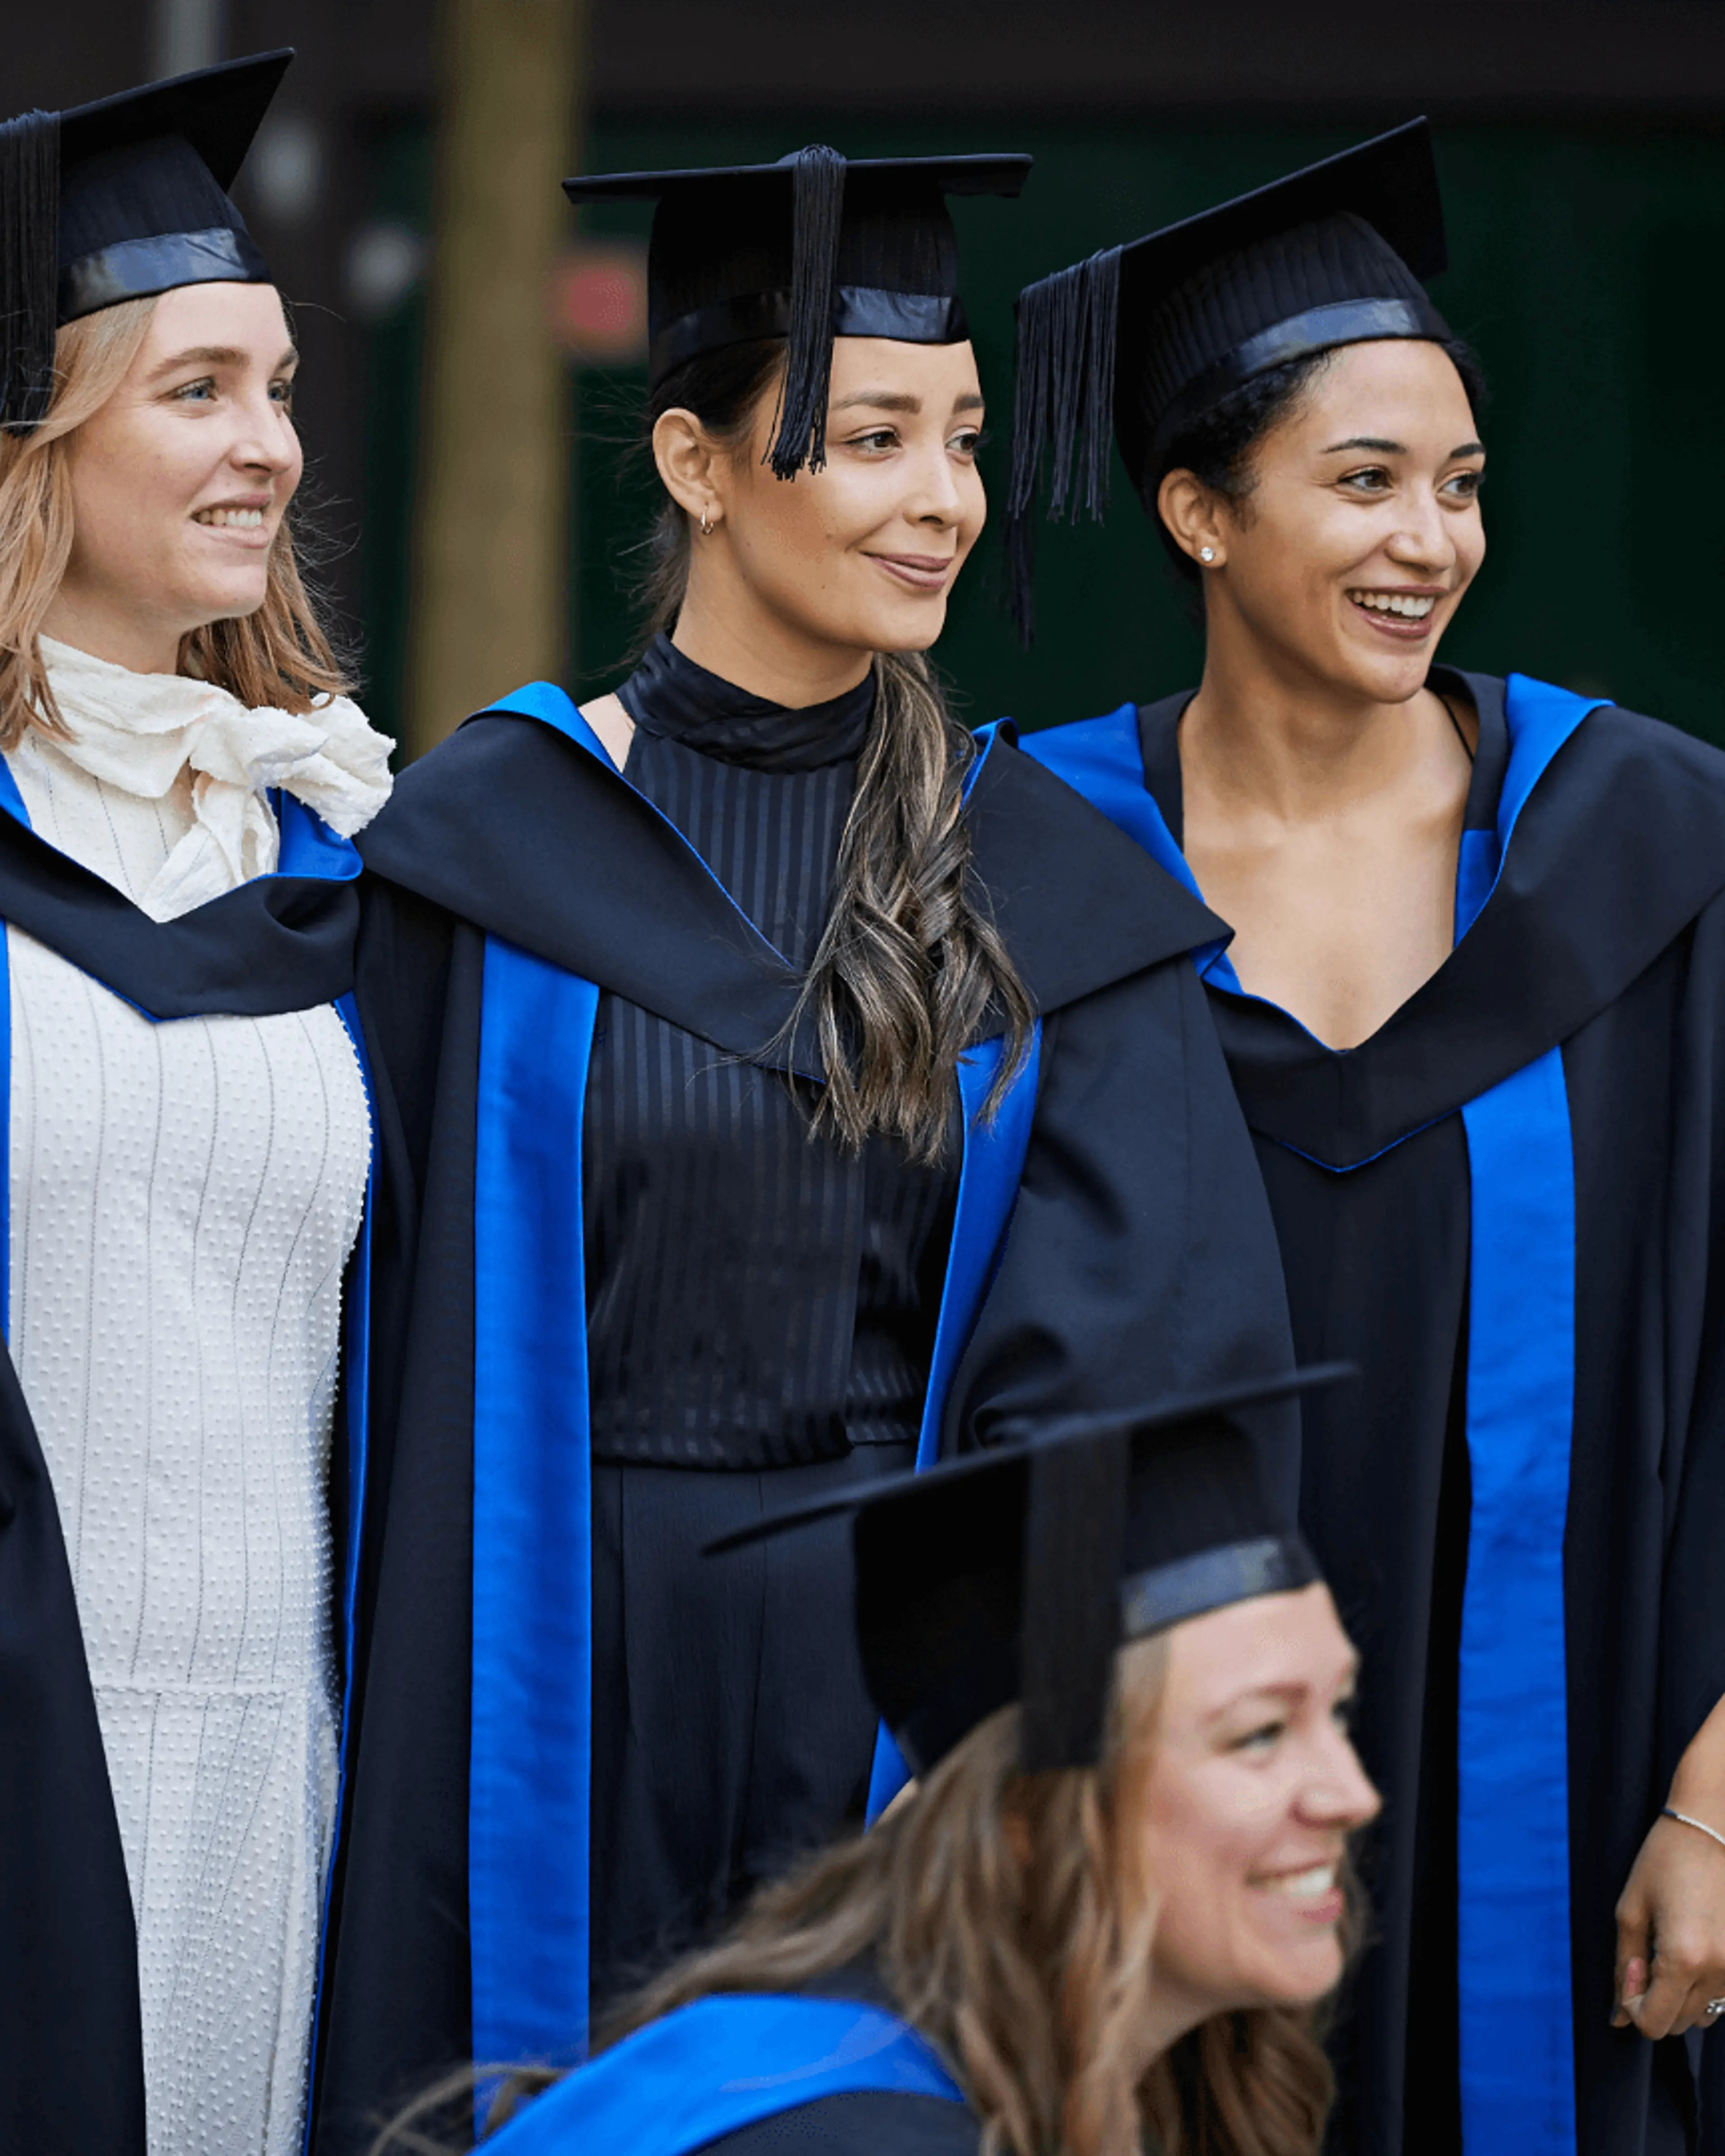 Camila Boada, Full-Time MBA Class of 2022, with her class mates on the graduation day